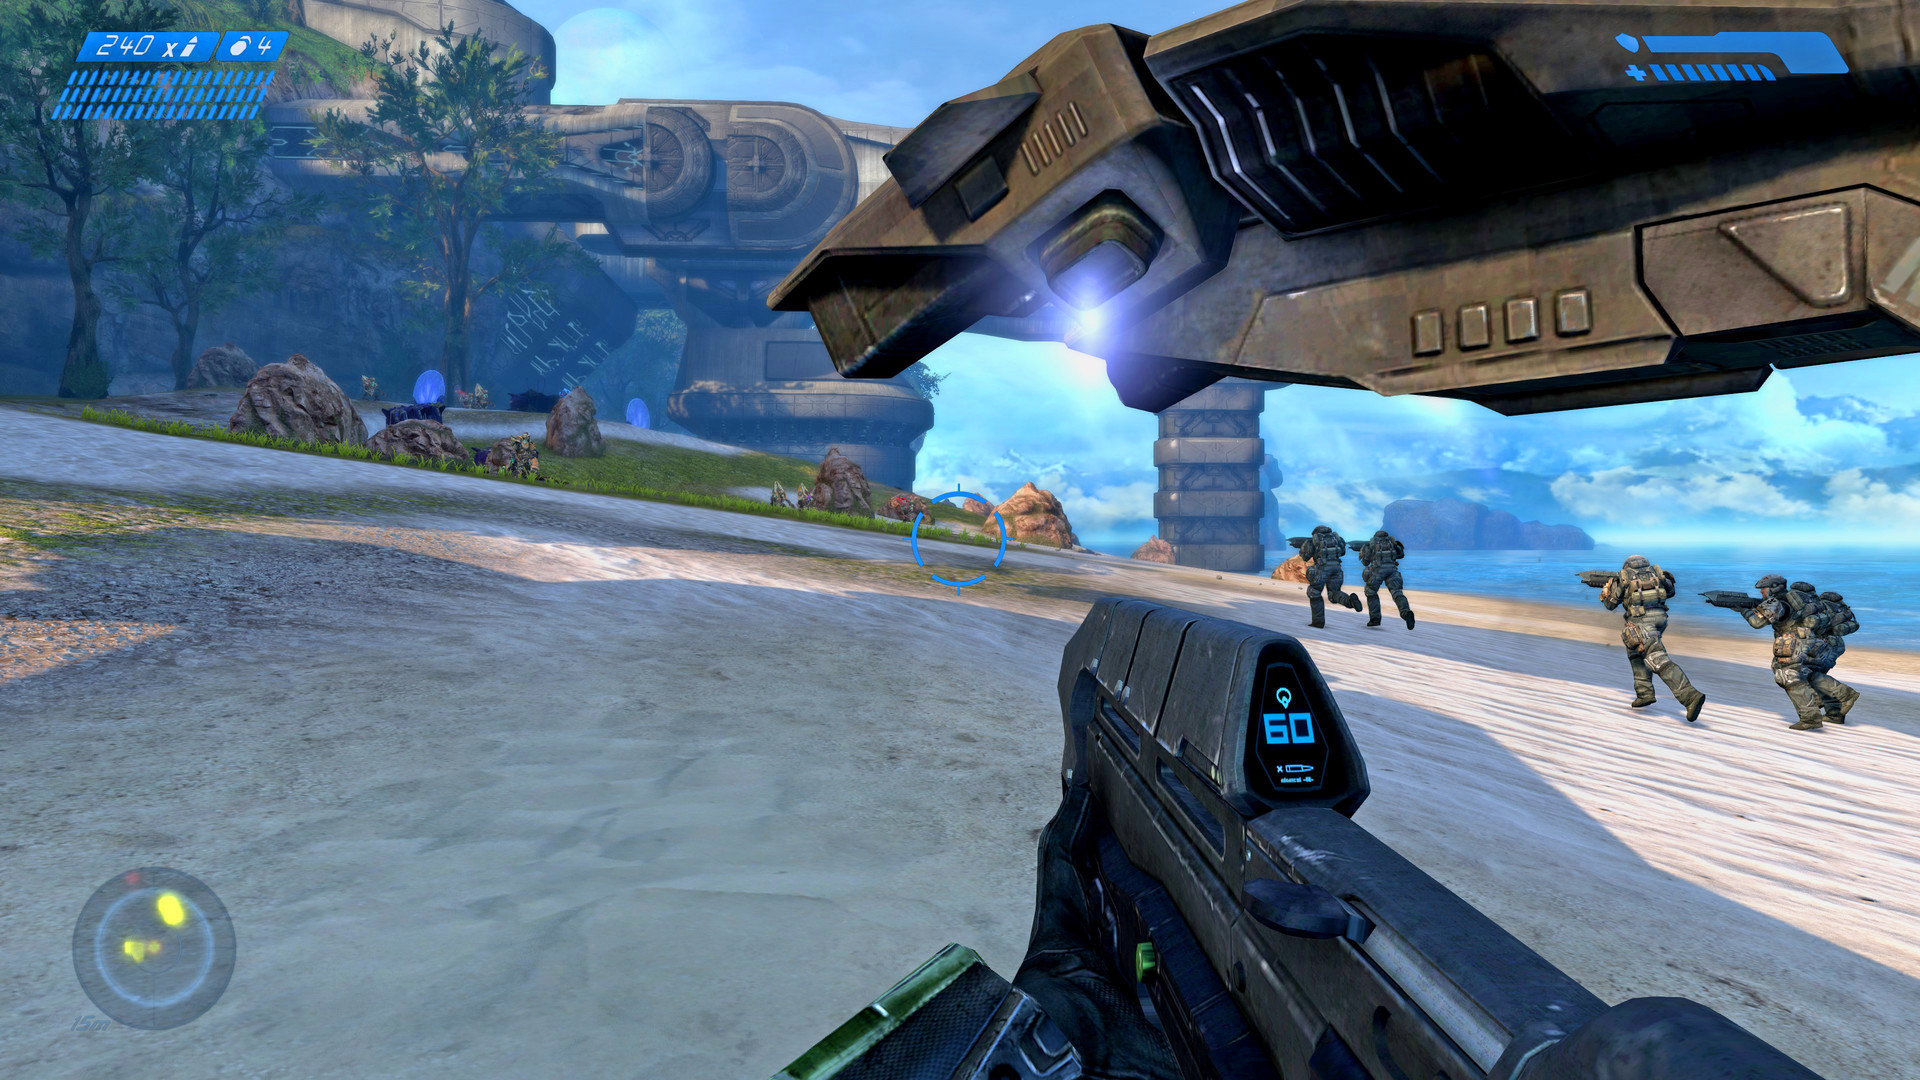 Halo Combat Evolved Version Full Game Free Download